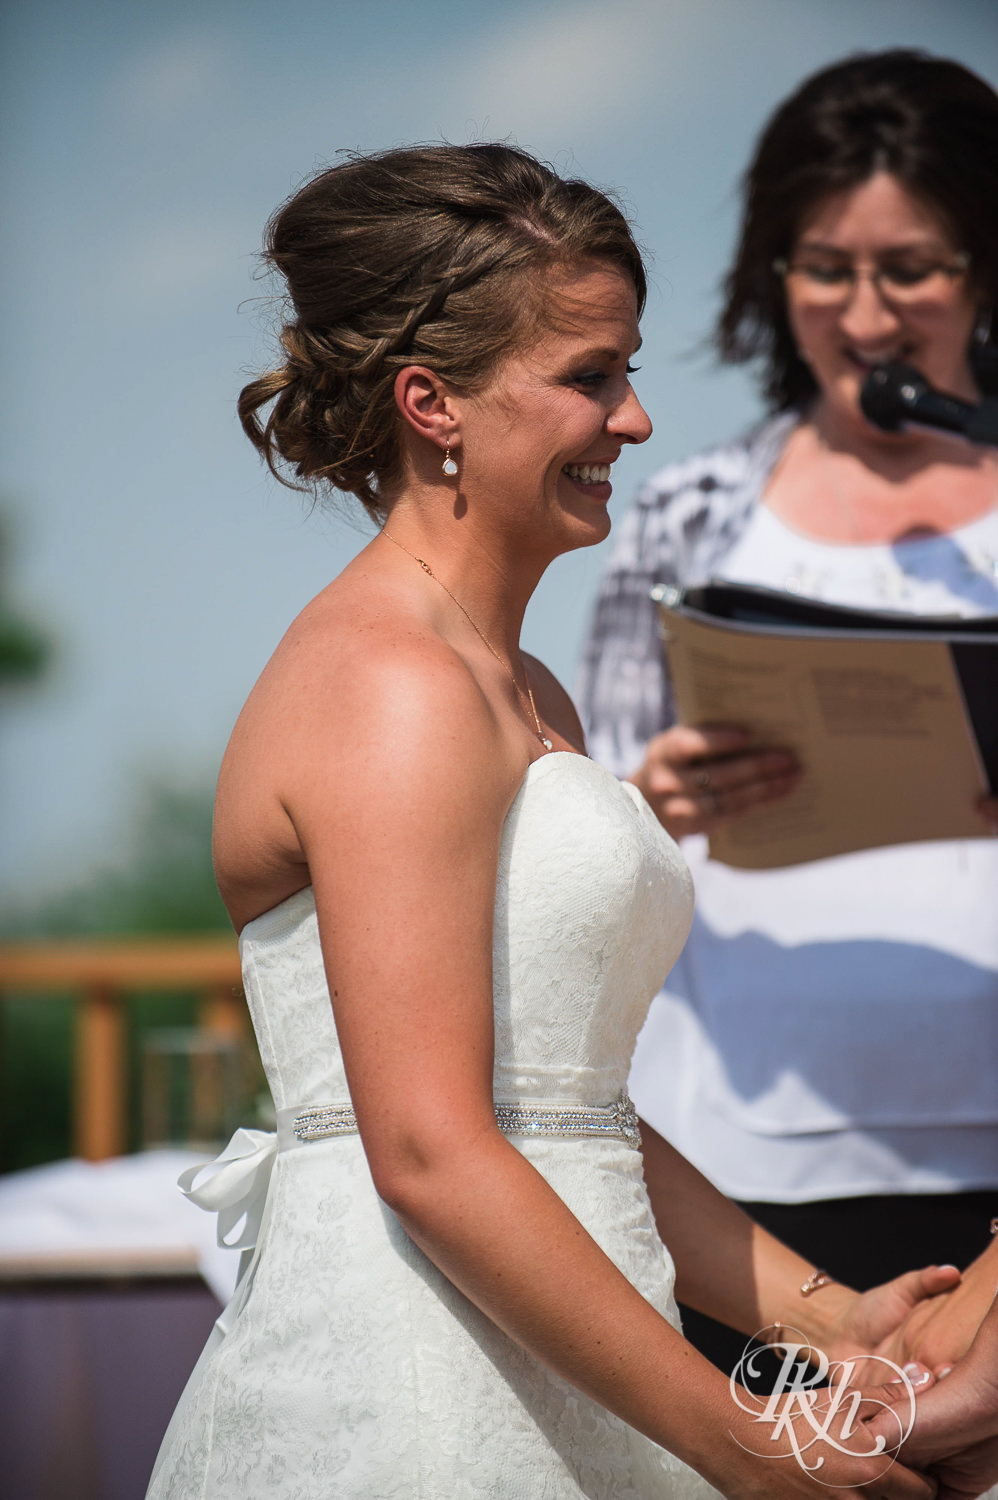 Lesbian brides smile during outdoor ceremony at Spirit Mountain in Duluth, Minnesota.